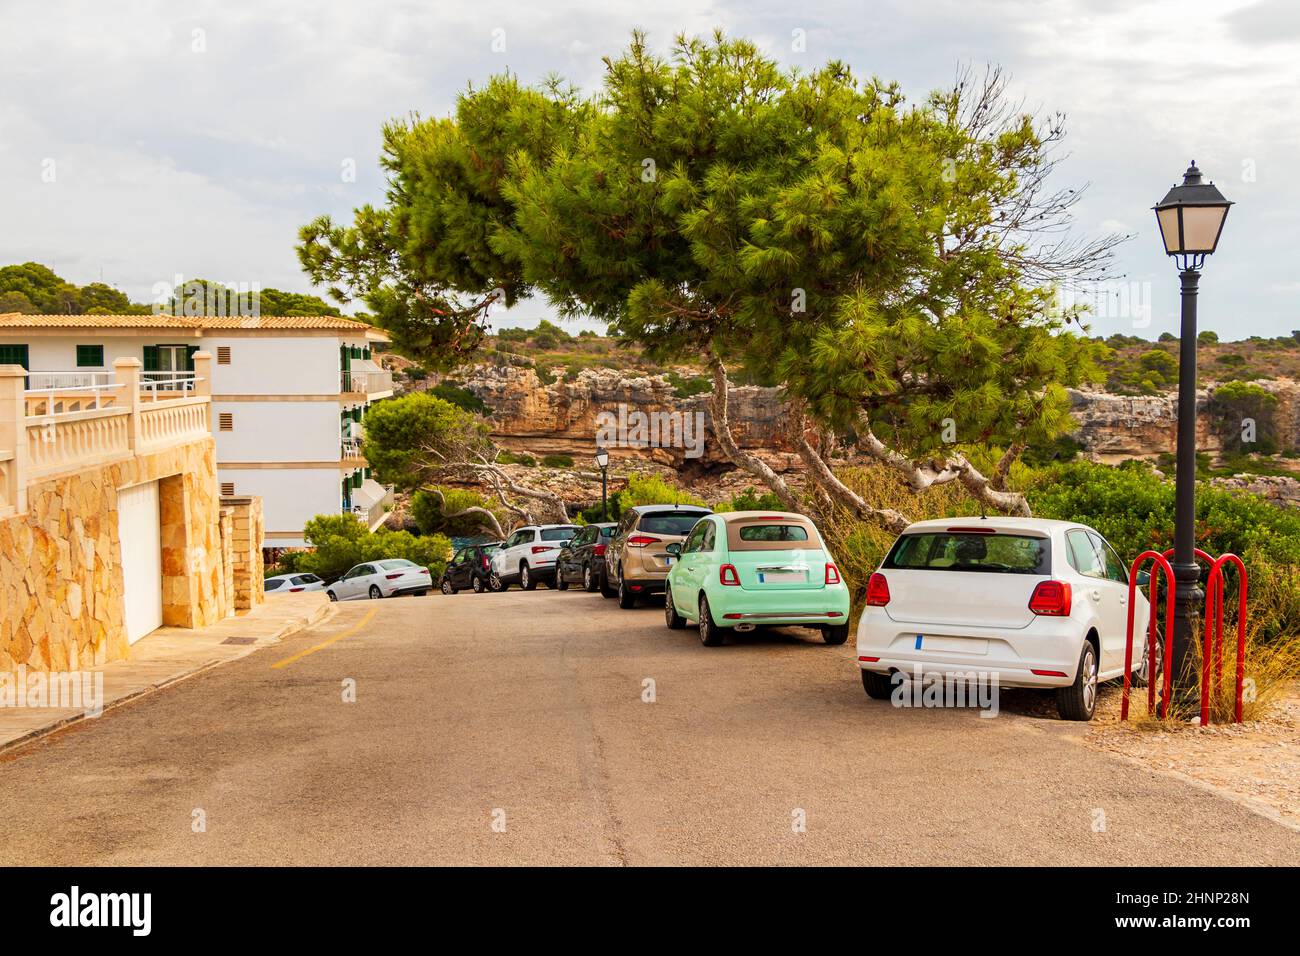 Typical street with parked cars in Cala Figuera Mallorca Spain. Stock Photo